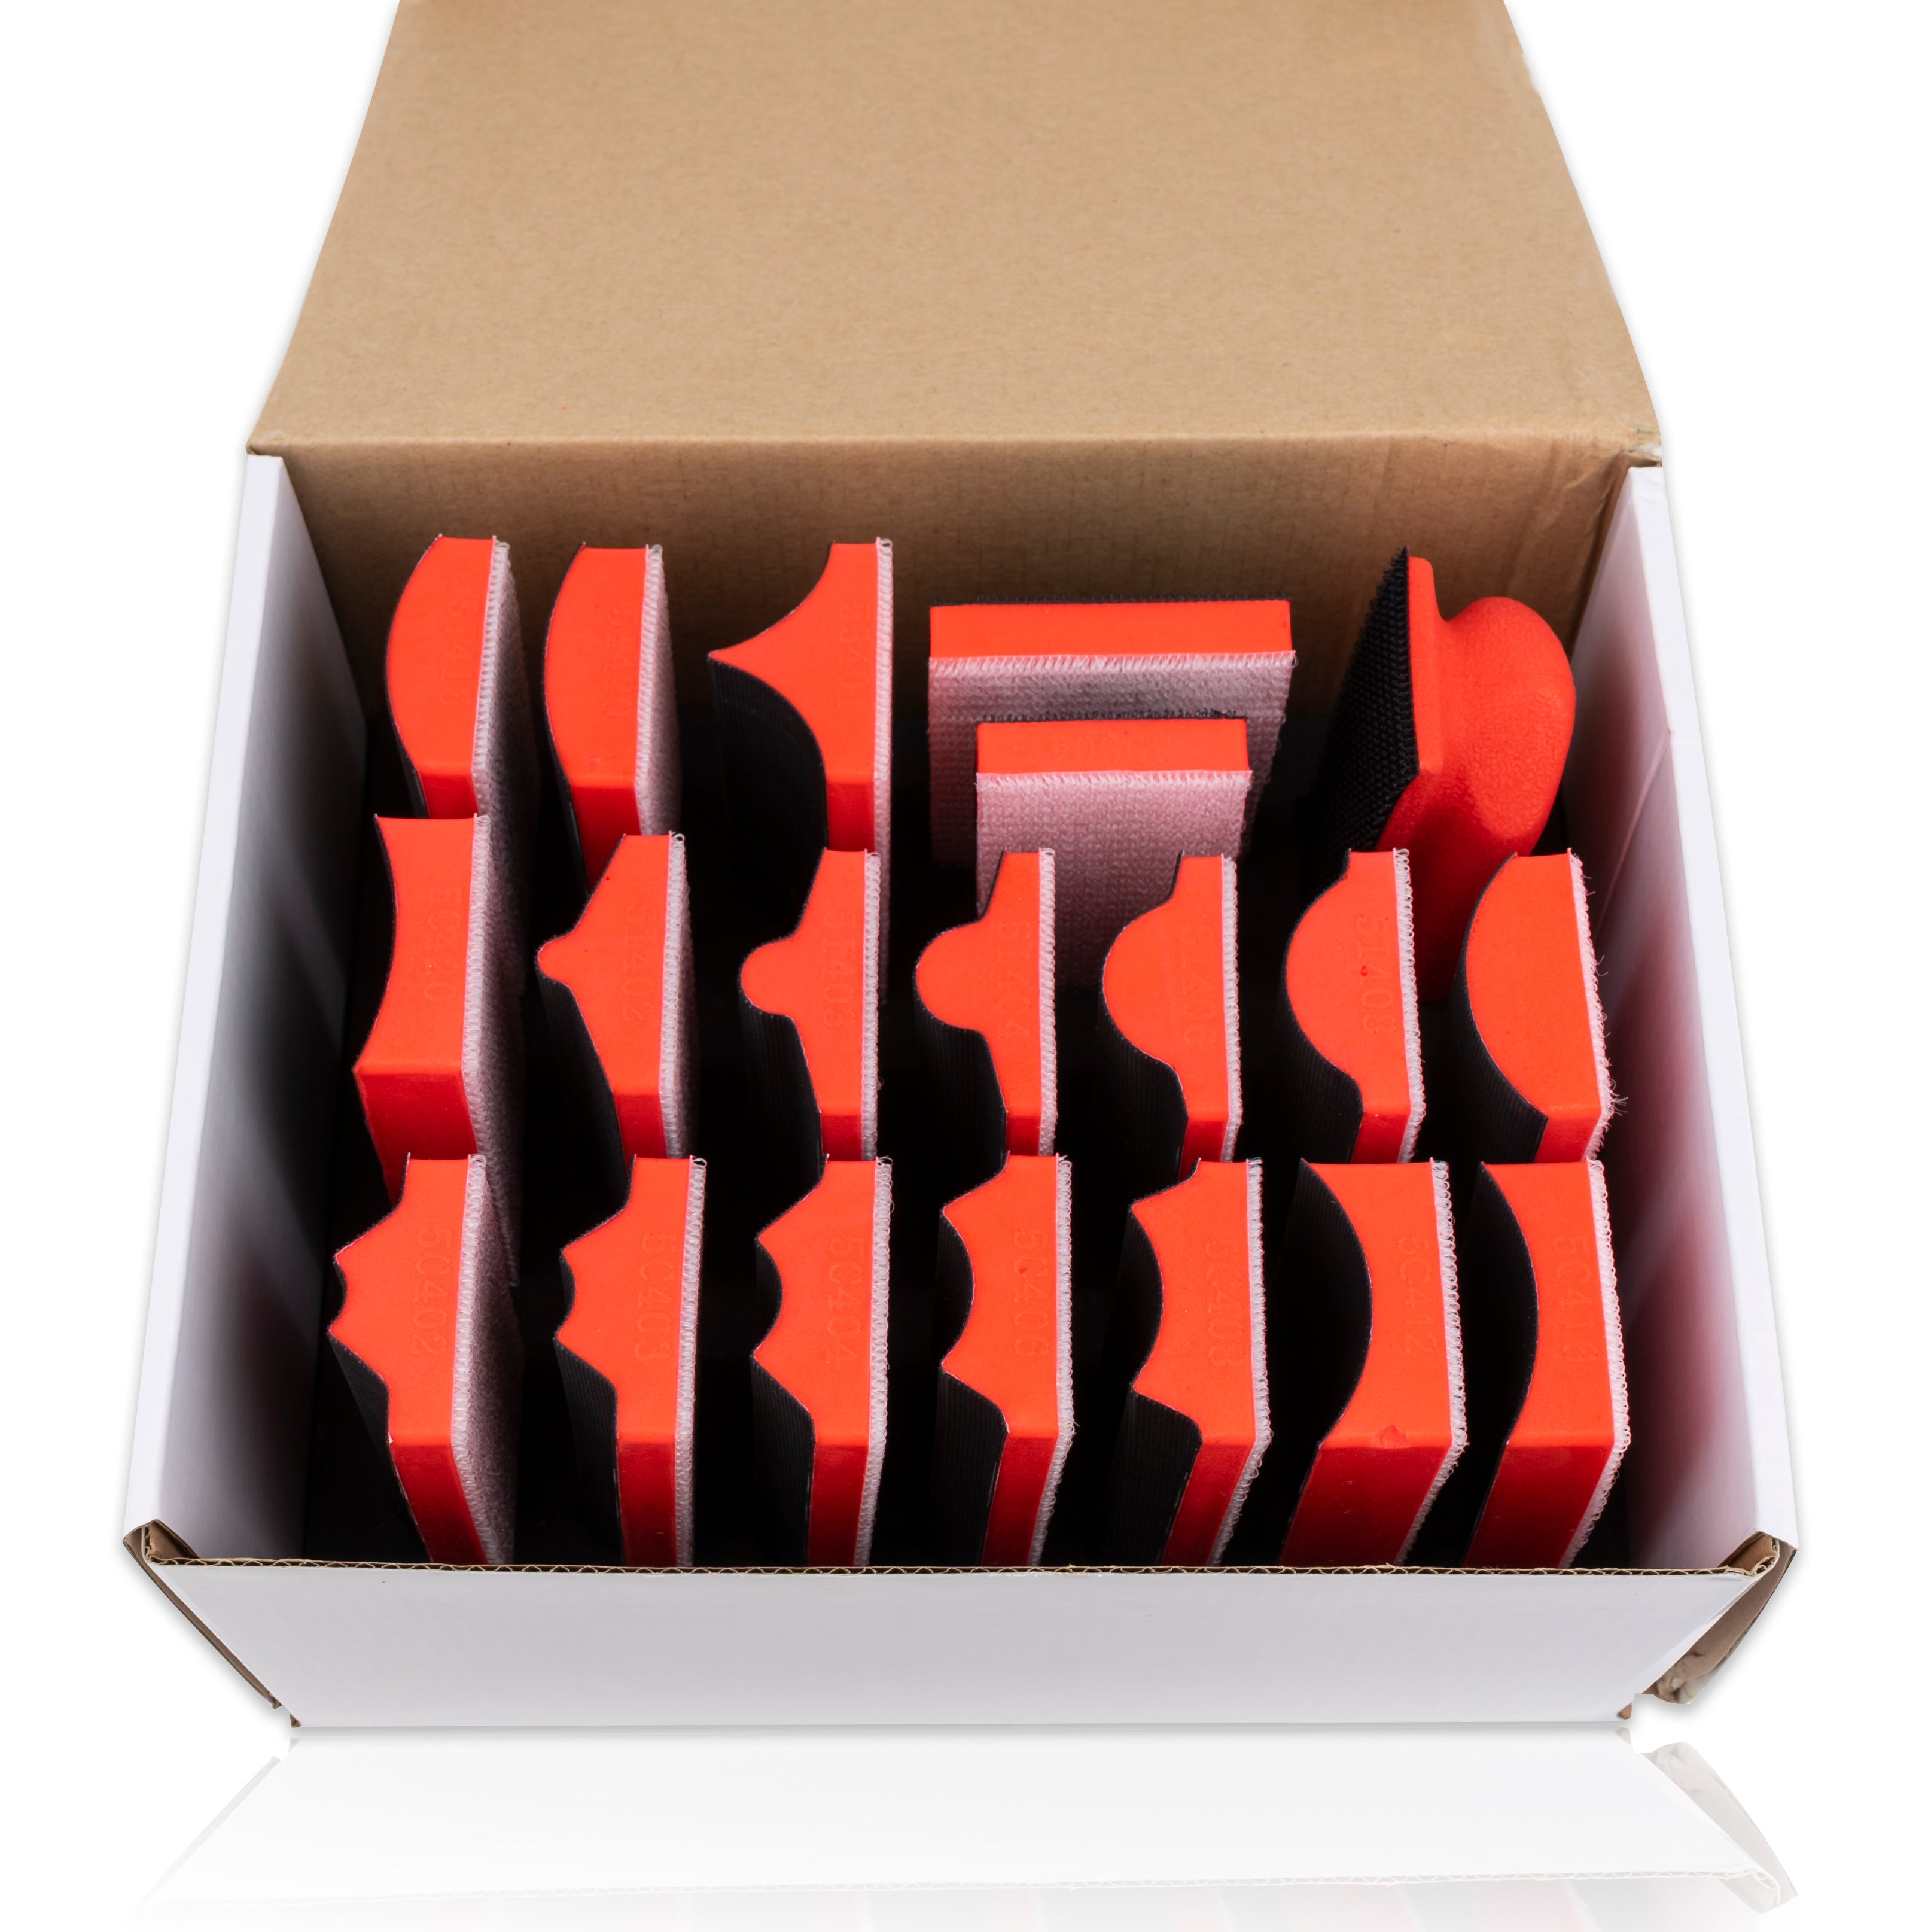 20pc Hand Sanding Block Set - Hook and Loop Interchangeable Assorted Shapes - Tool Guy Republic